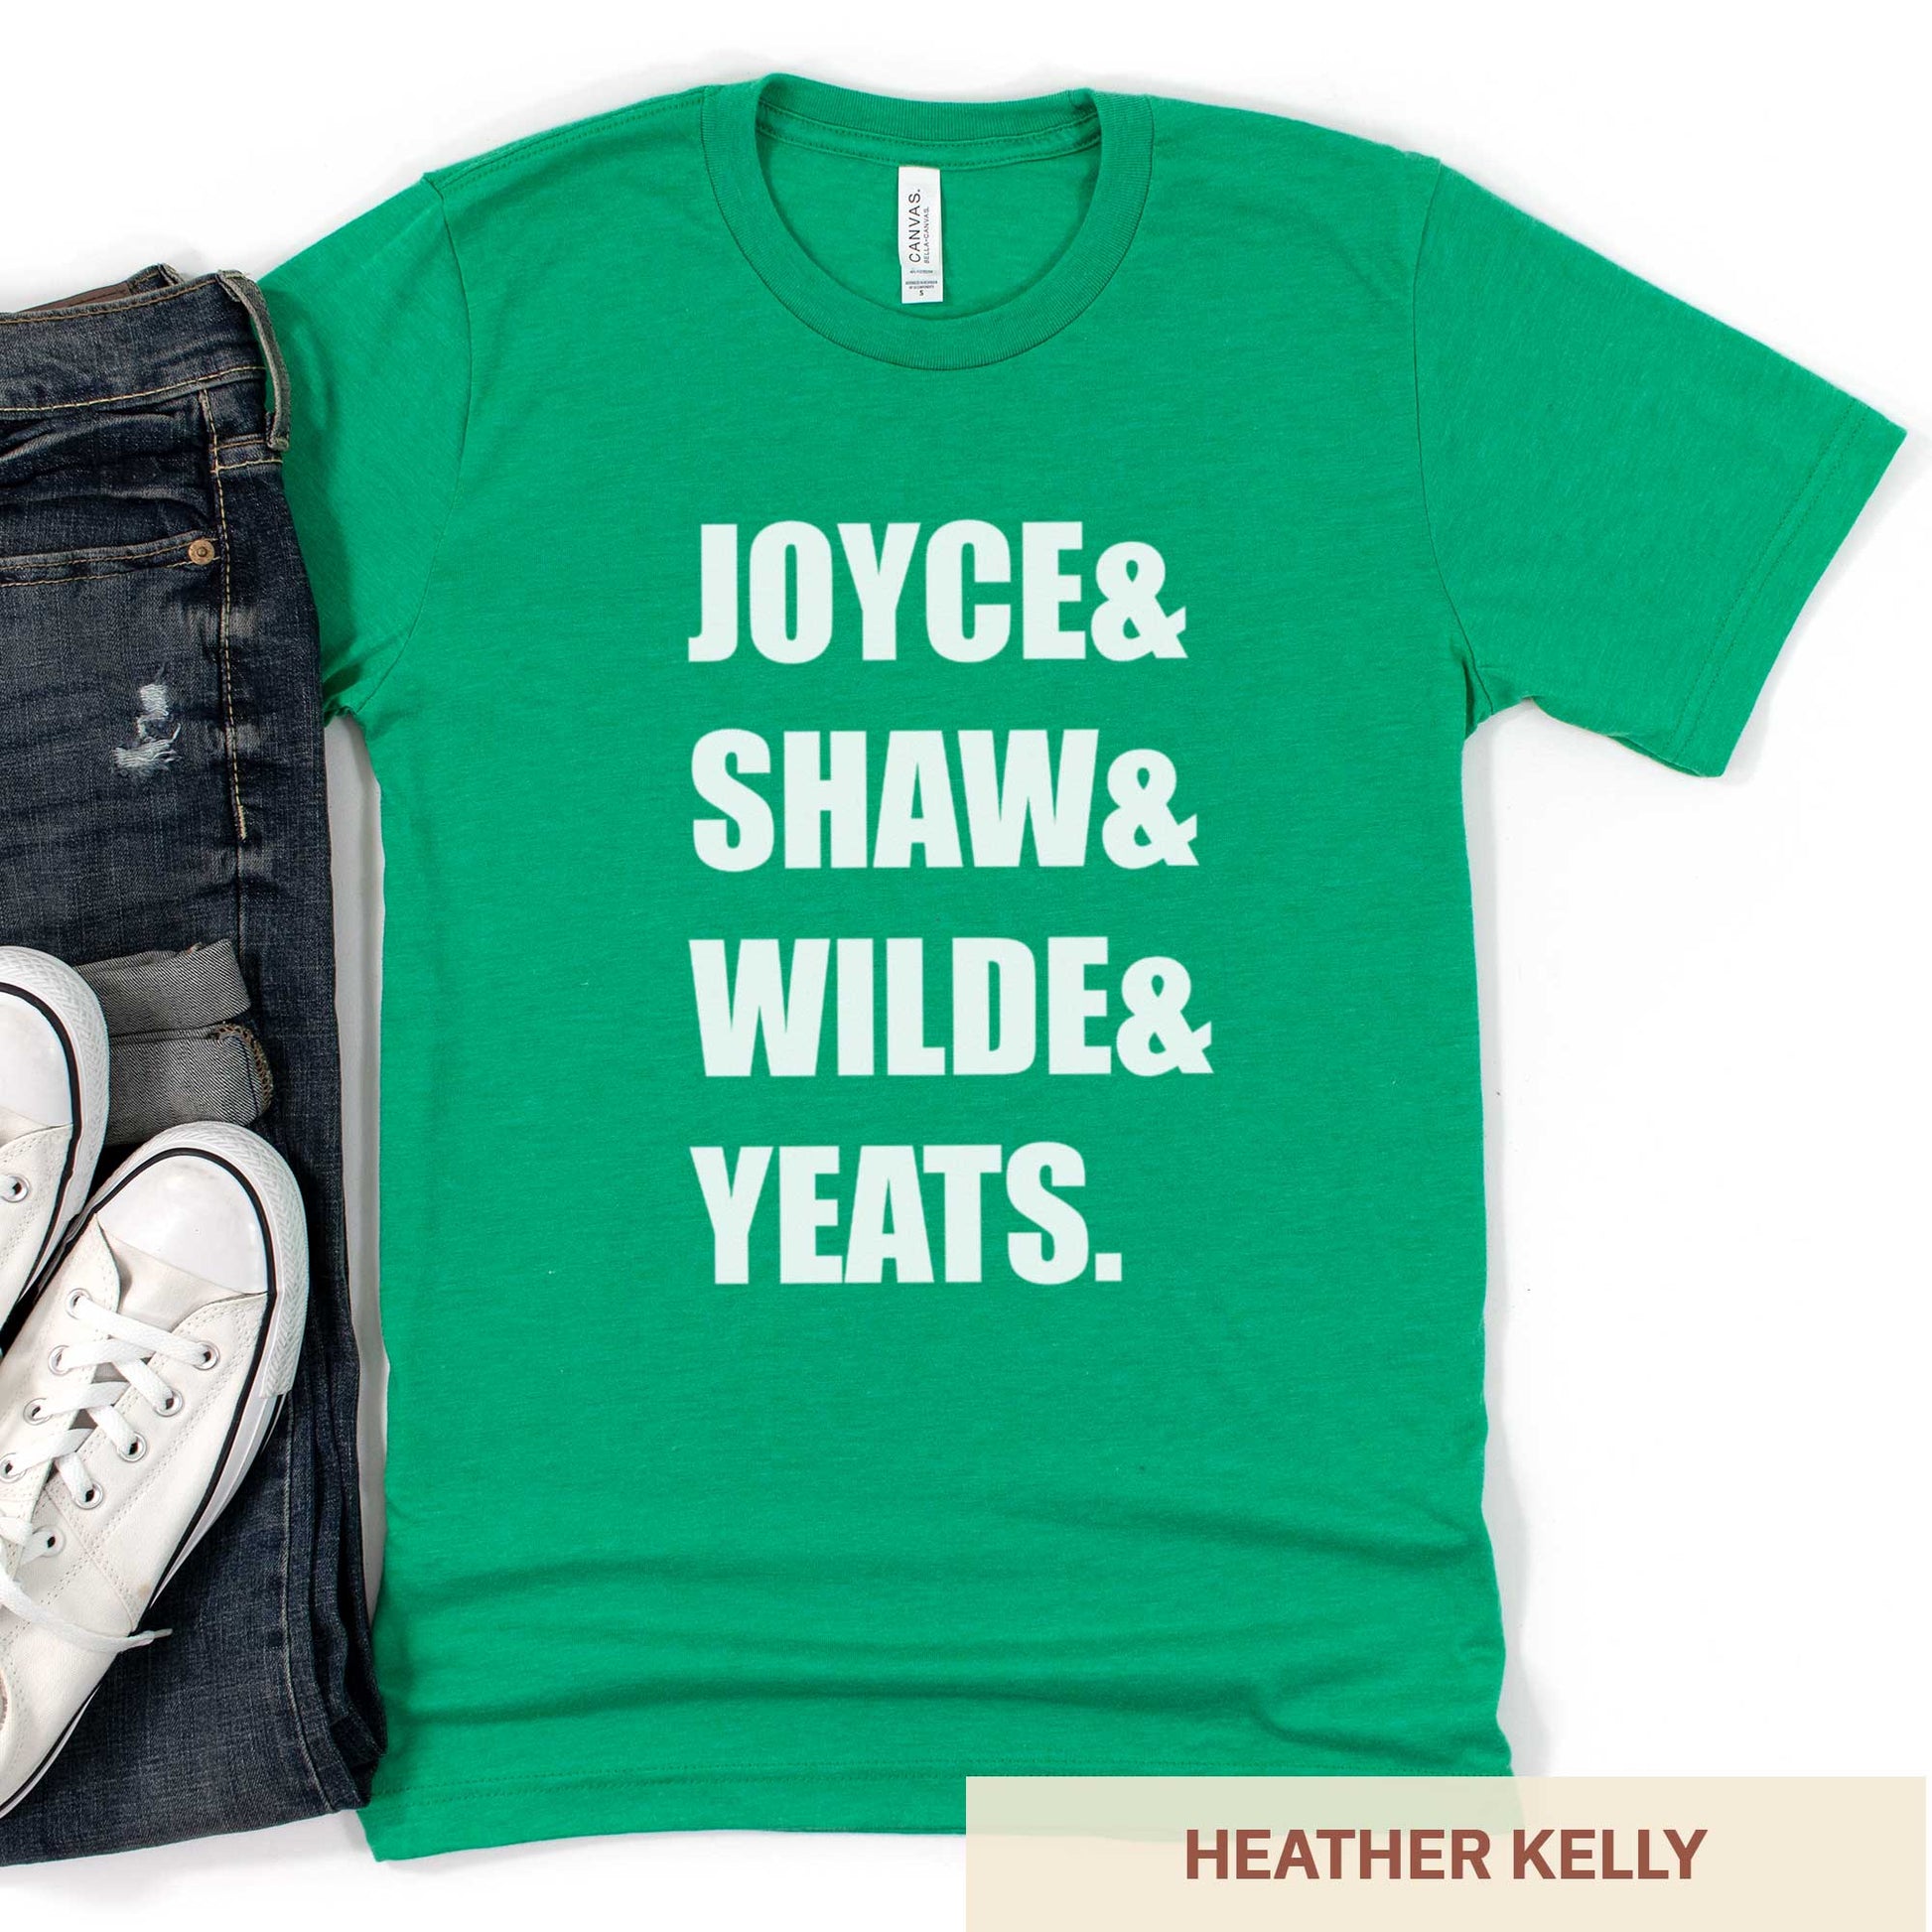 A heather kelly Bella Canvas t-shirt featuring the last names of Irish writers Joyce, Shaw, Wilde and Yeats.